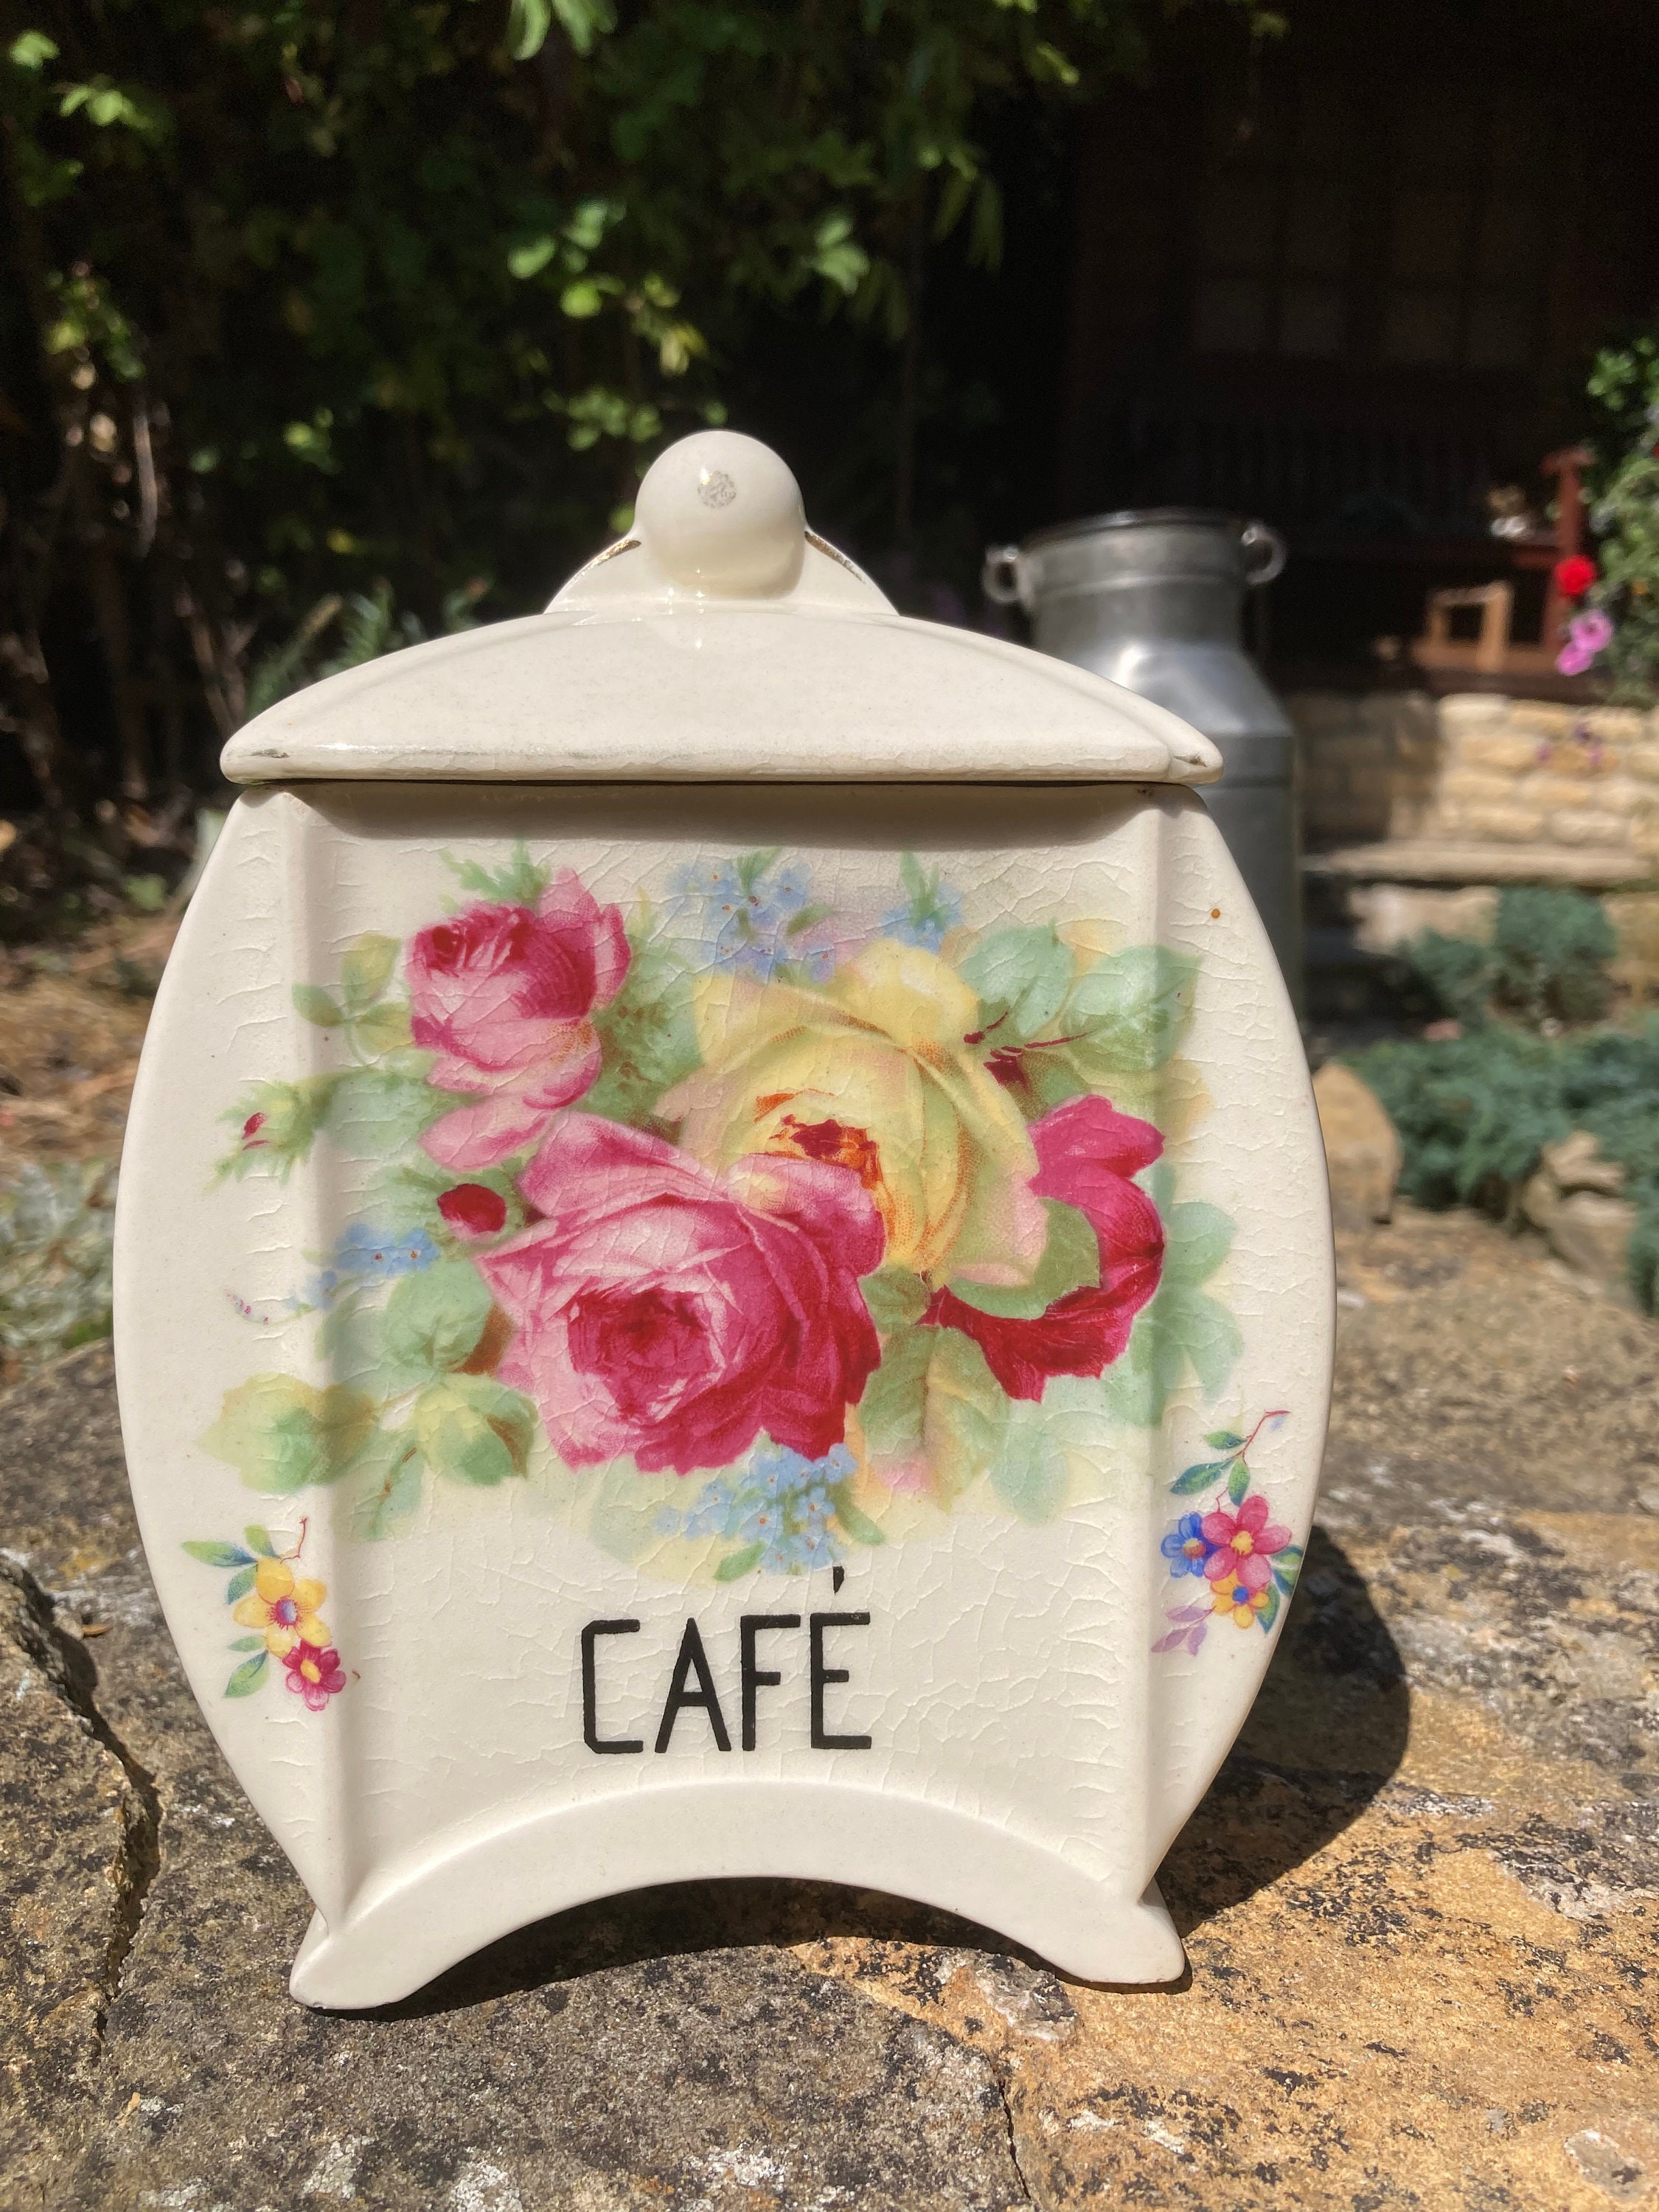 French Vintage Mariage Frères Tea/Coffee Container - Shop At